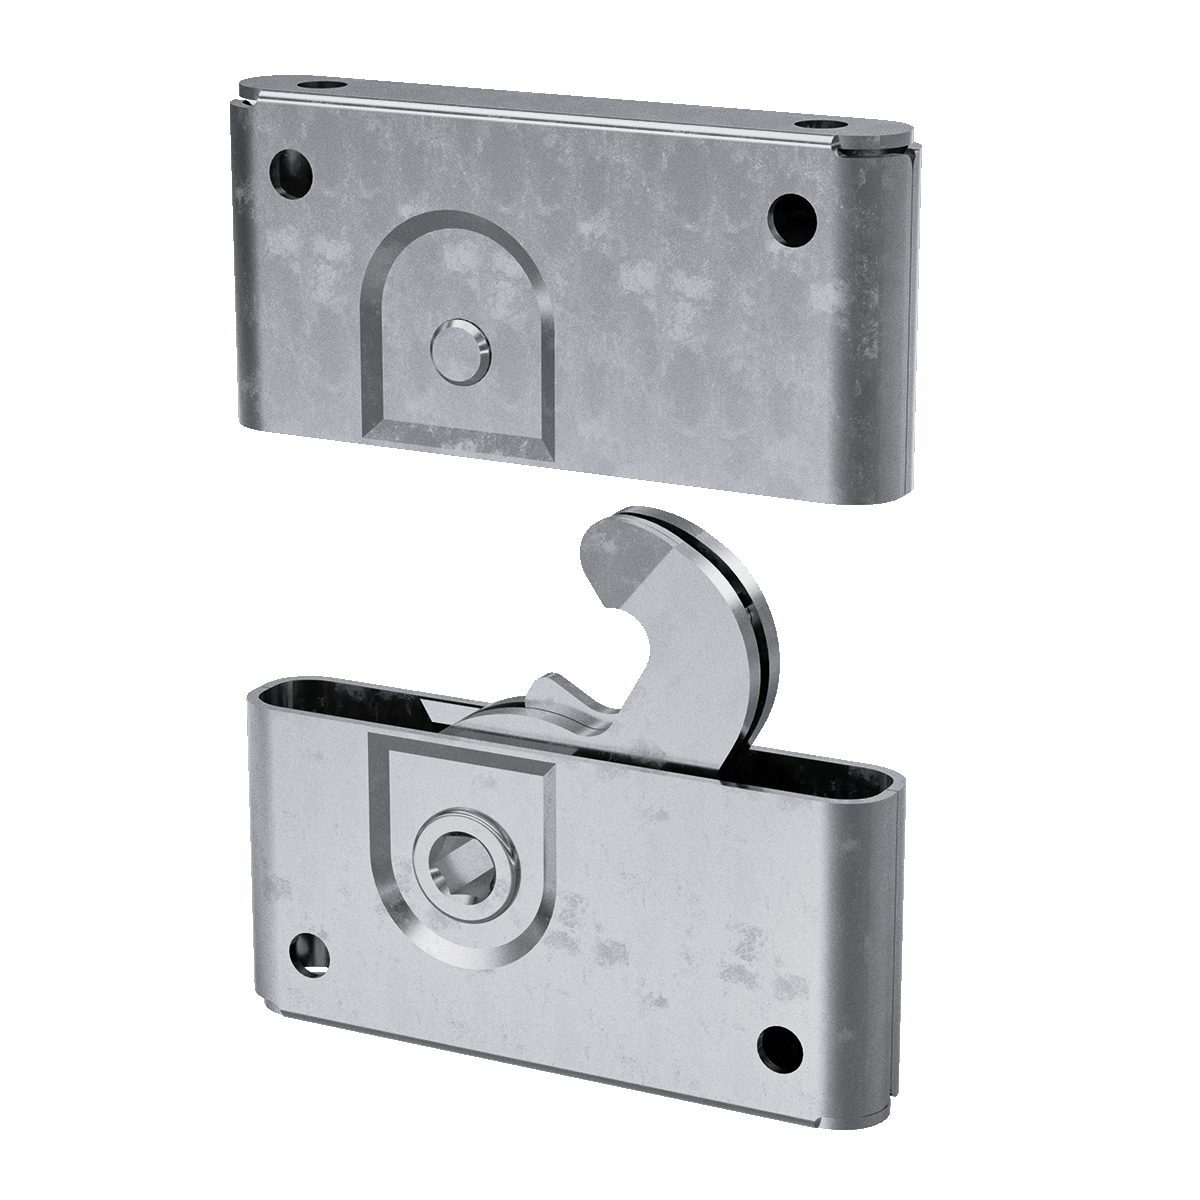 Southco dual roto-lock latch and receptacle asemlby